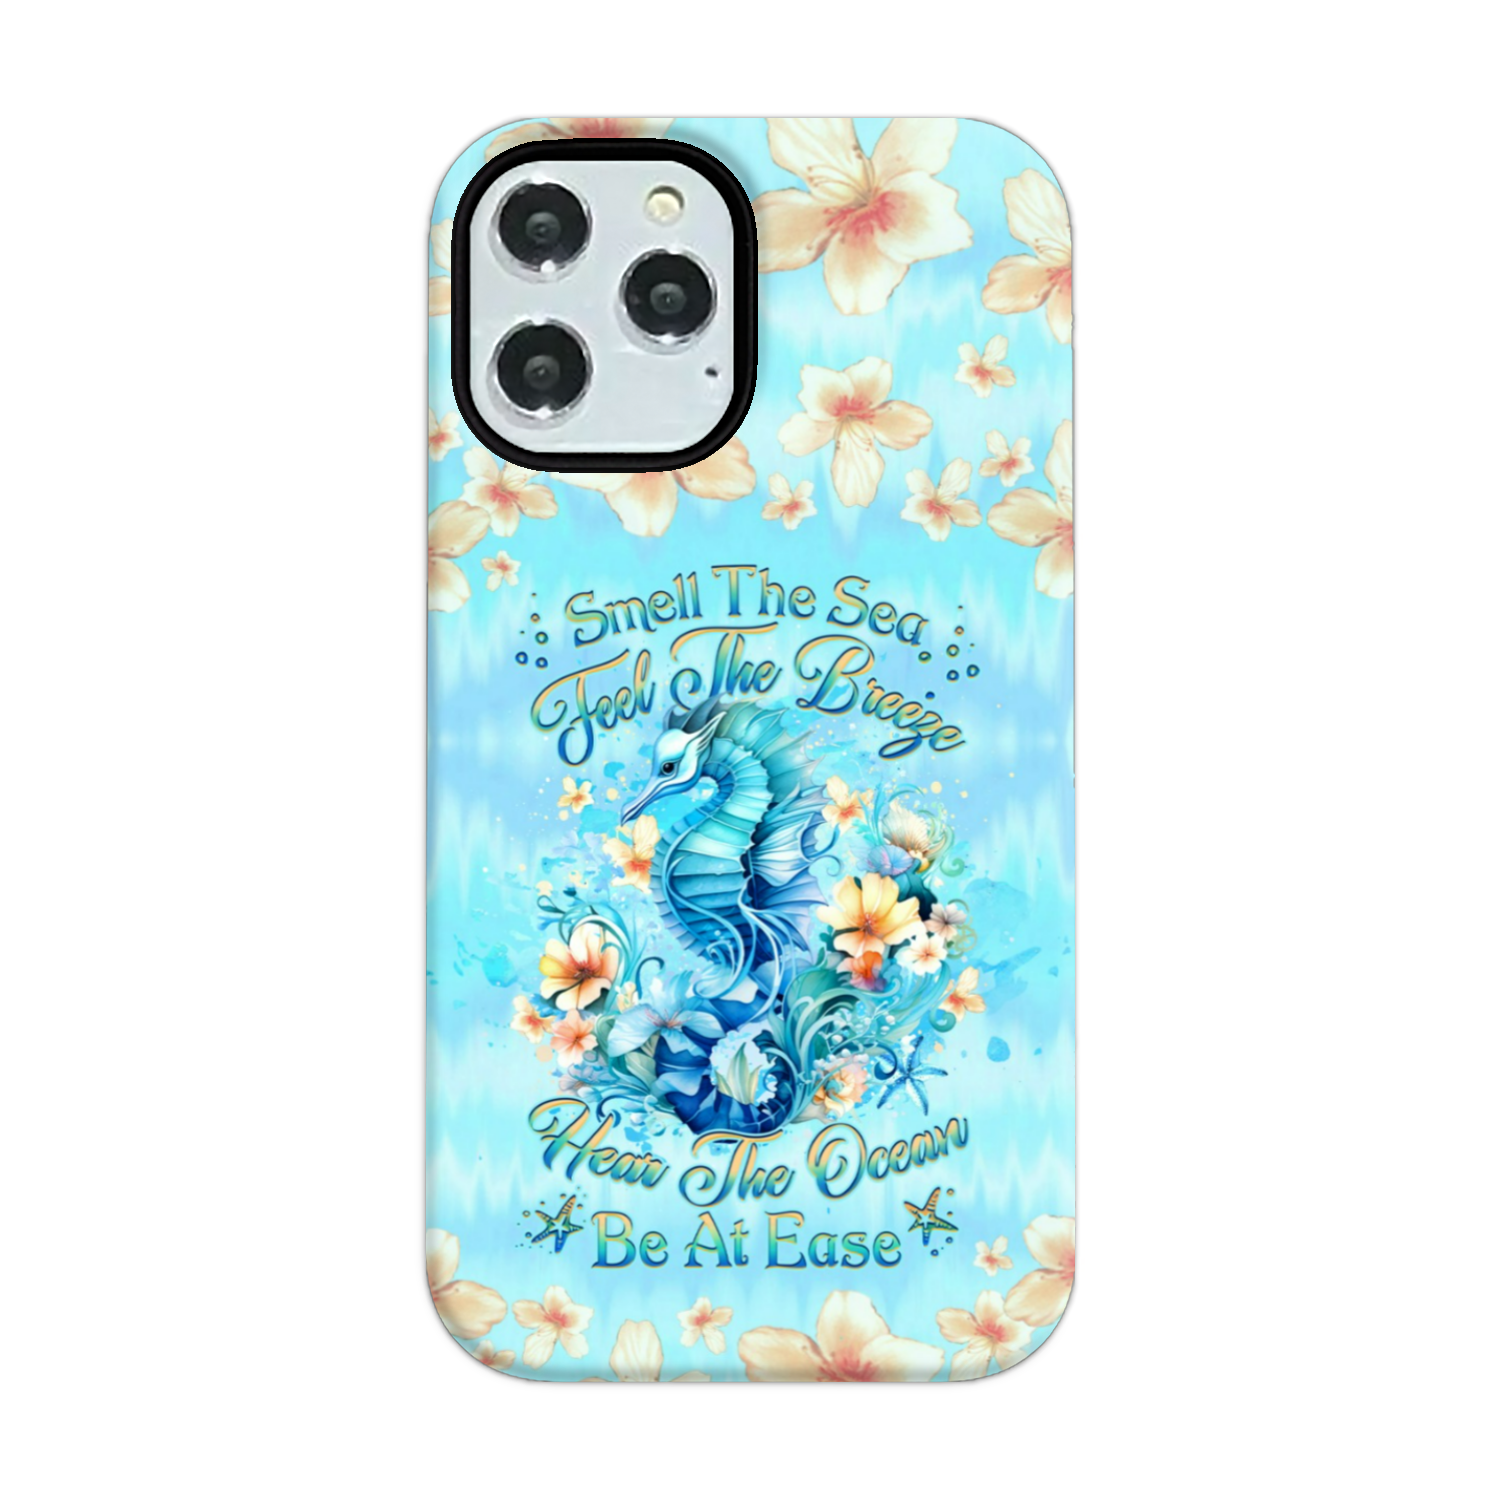 SMELL THE SEA FEEL THE BREEZE SEAHORSE PHONE CASE - YHHG2407234